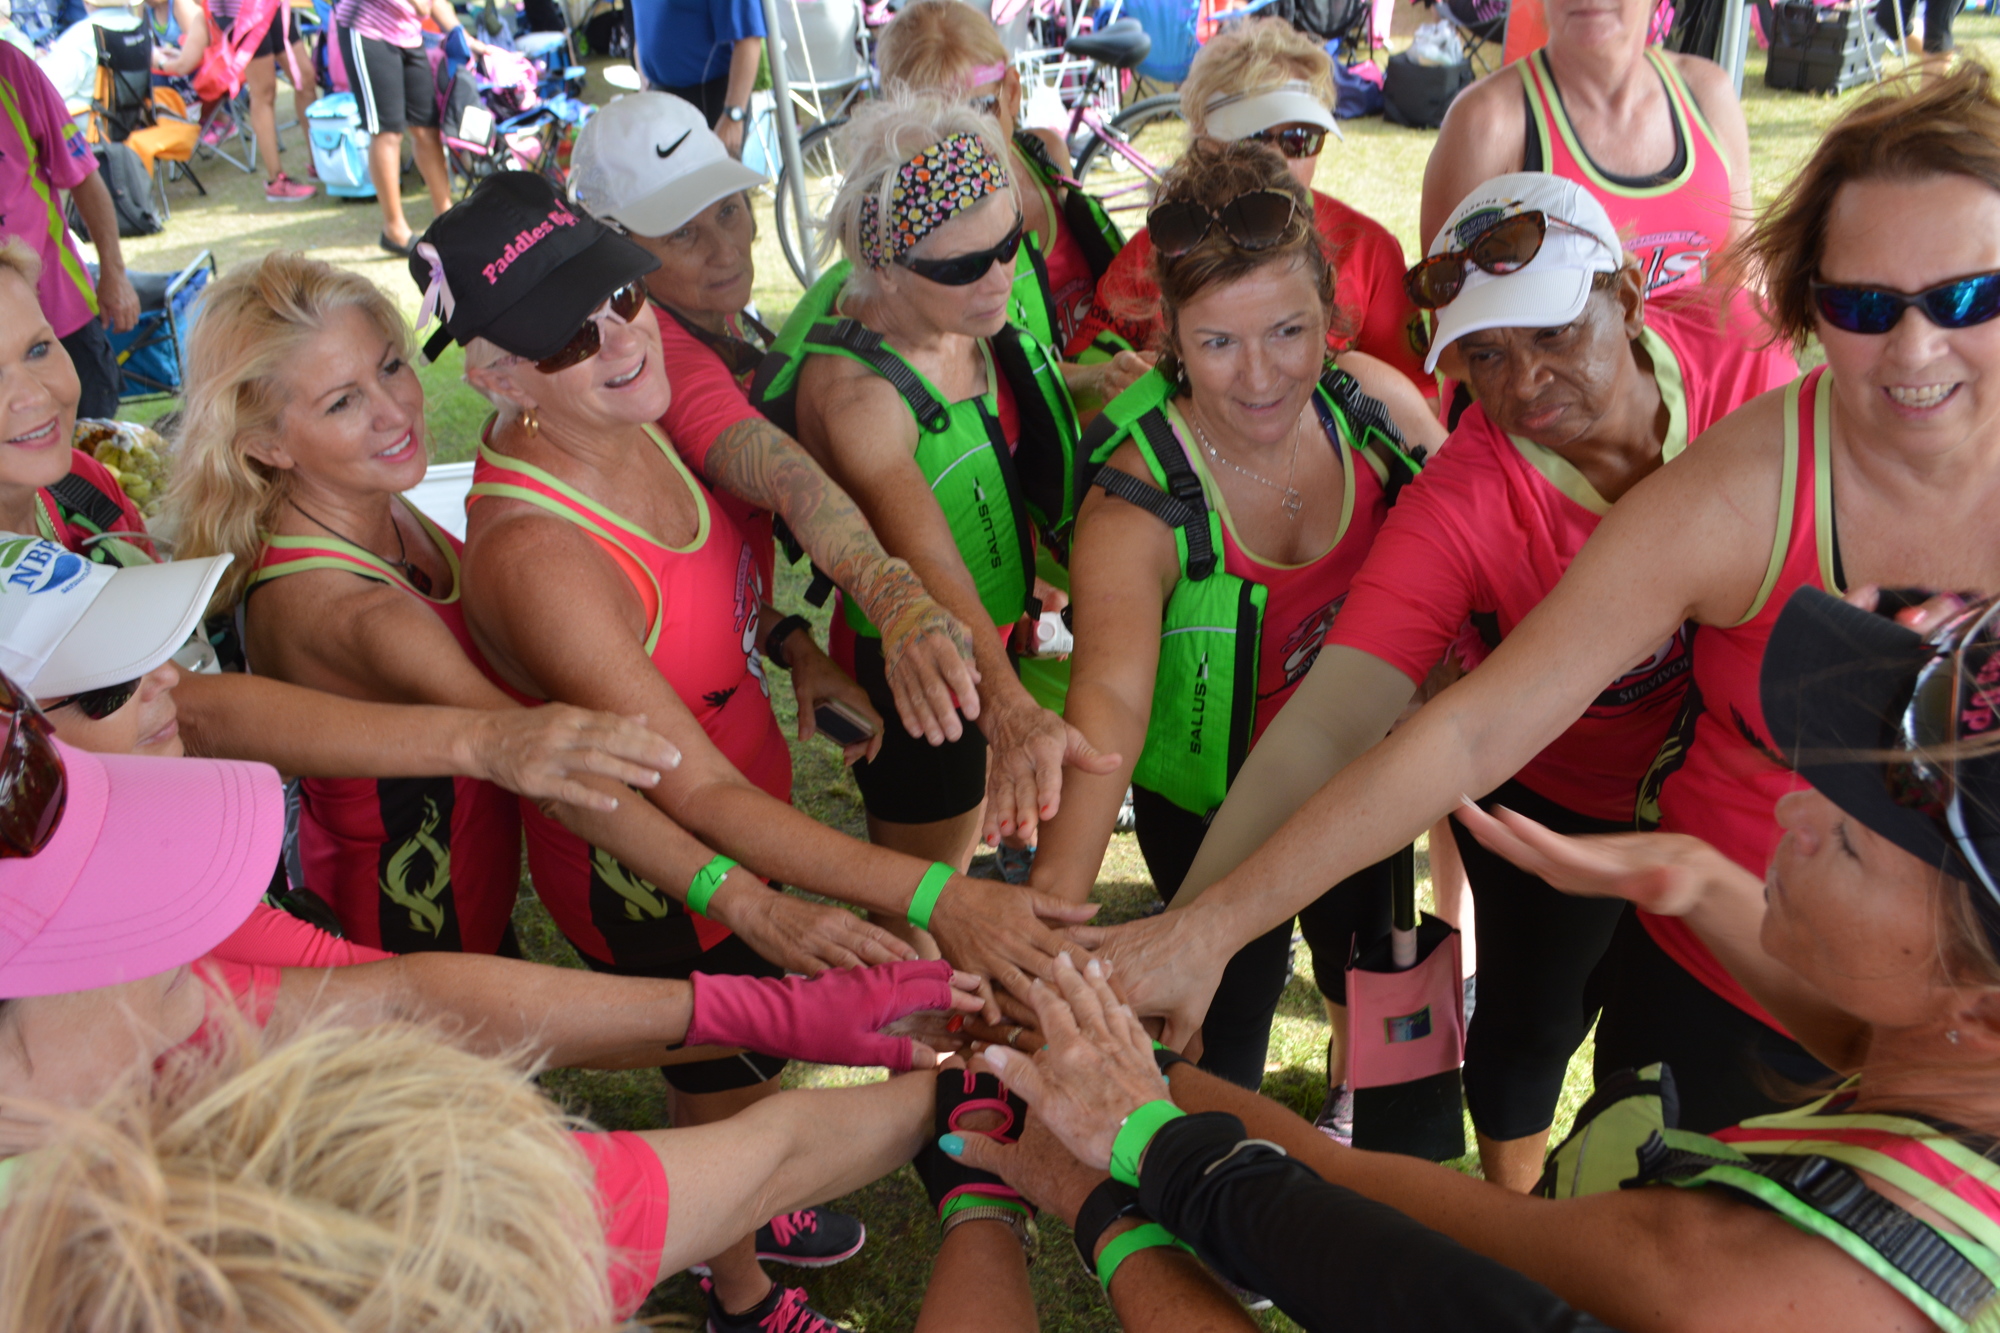 Survivors in Sync wants to inspire breast cancer survivors, but winning would be nice, too.